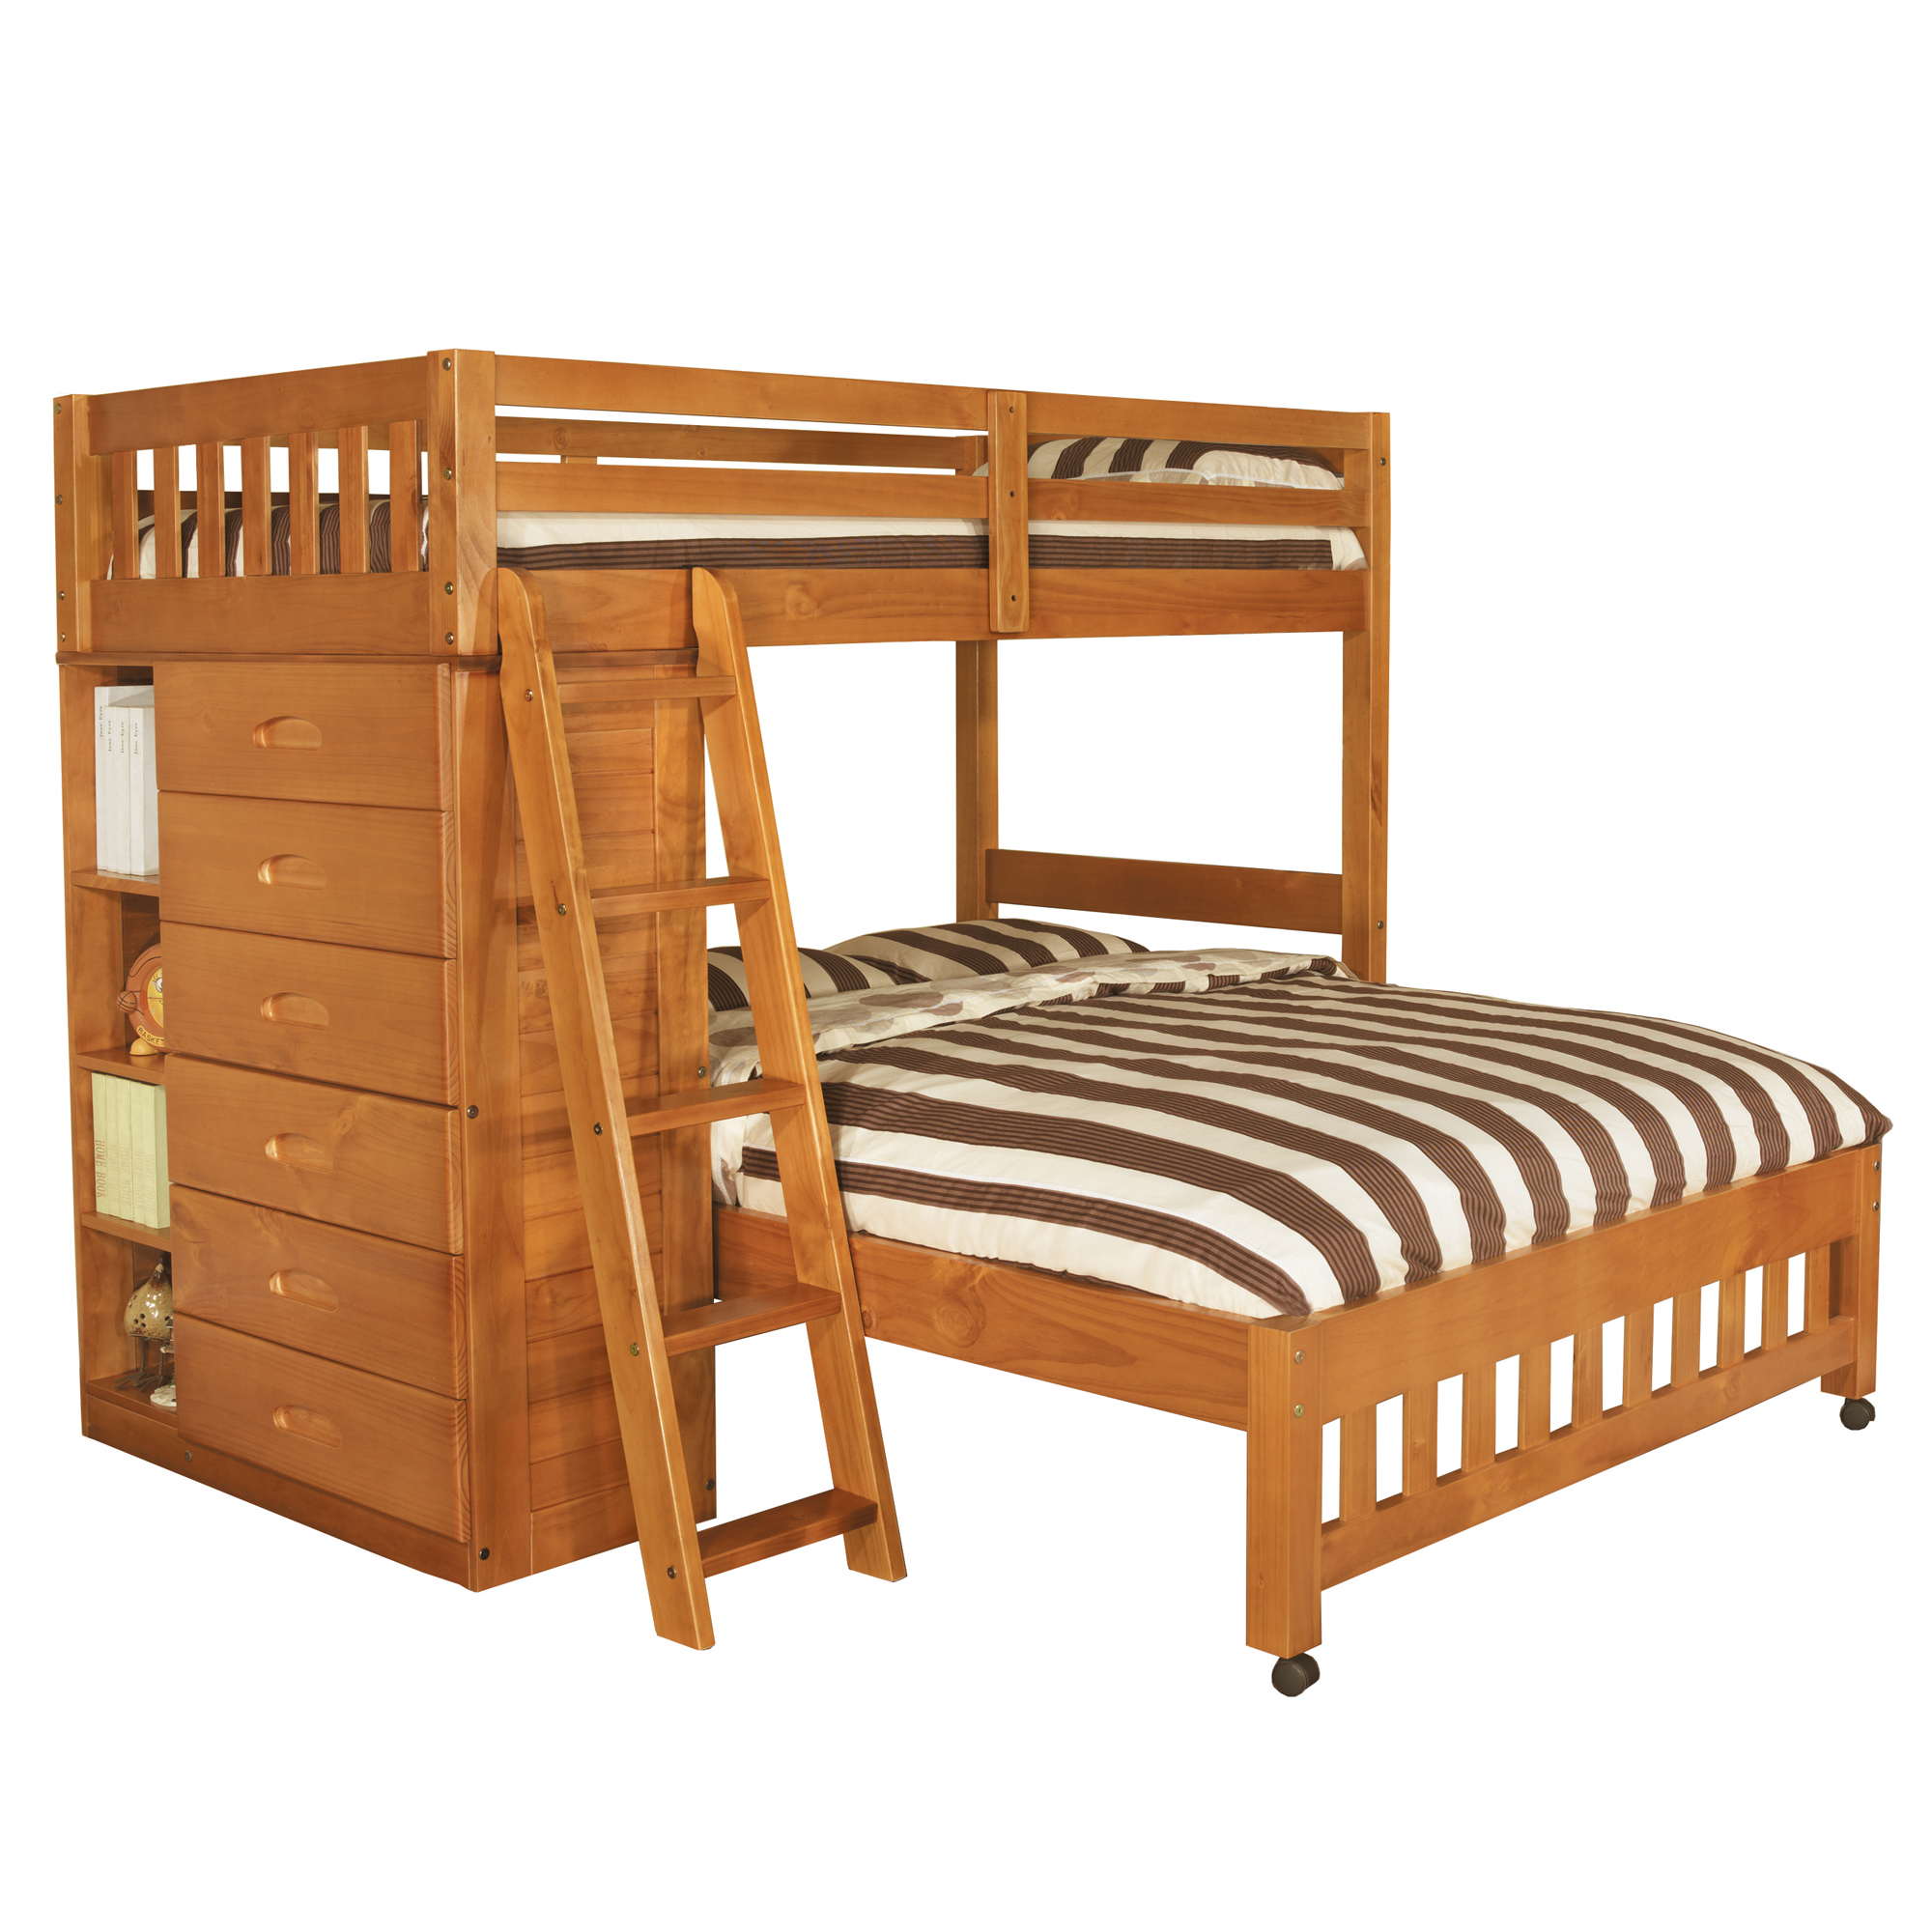 Discovery World Furniture Honey Twin, L Shaped Triple Bunk Bed Twin Over Full Size